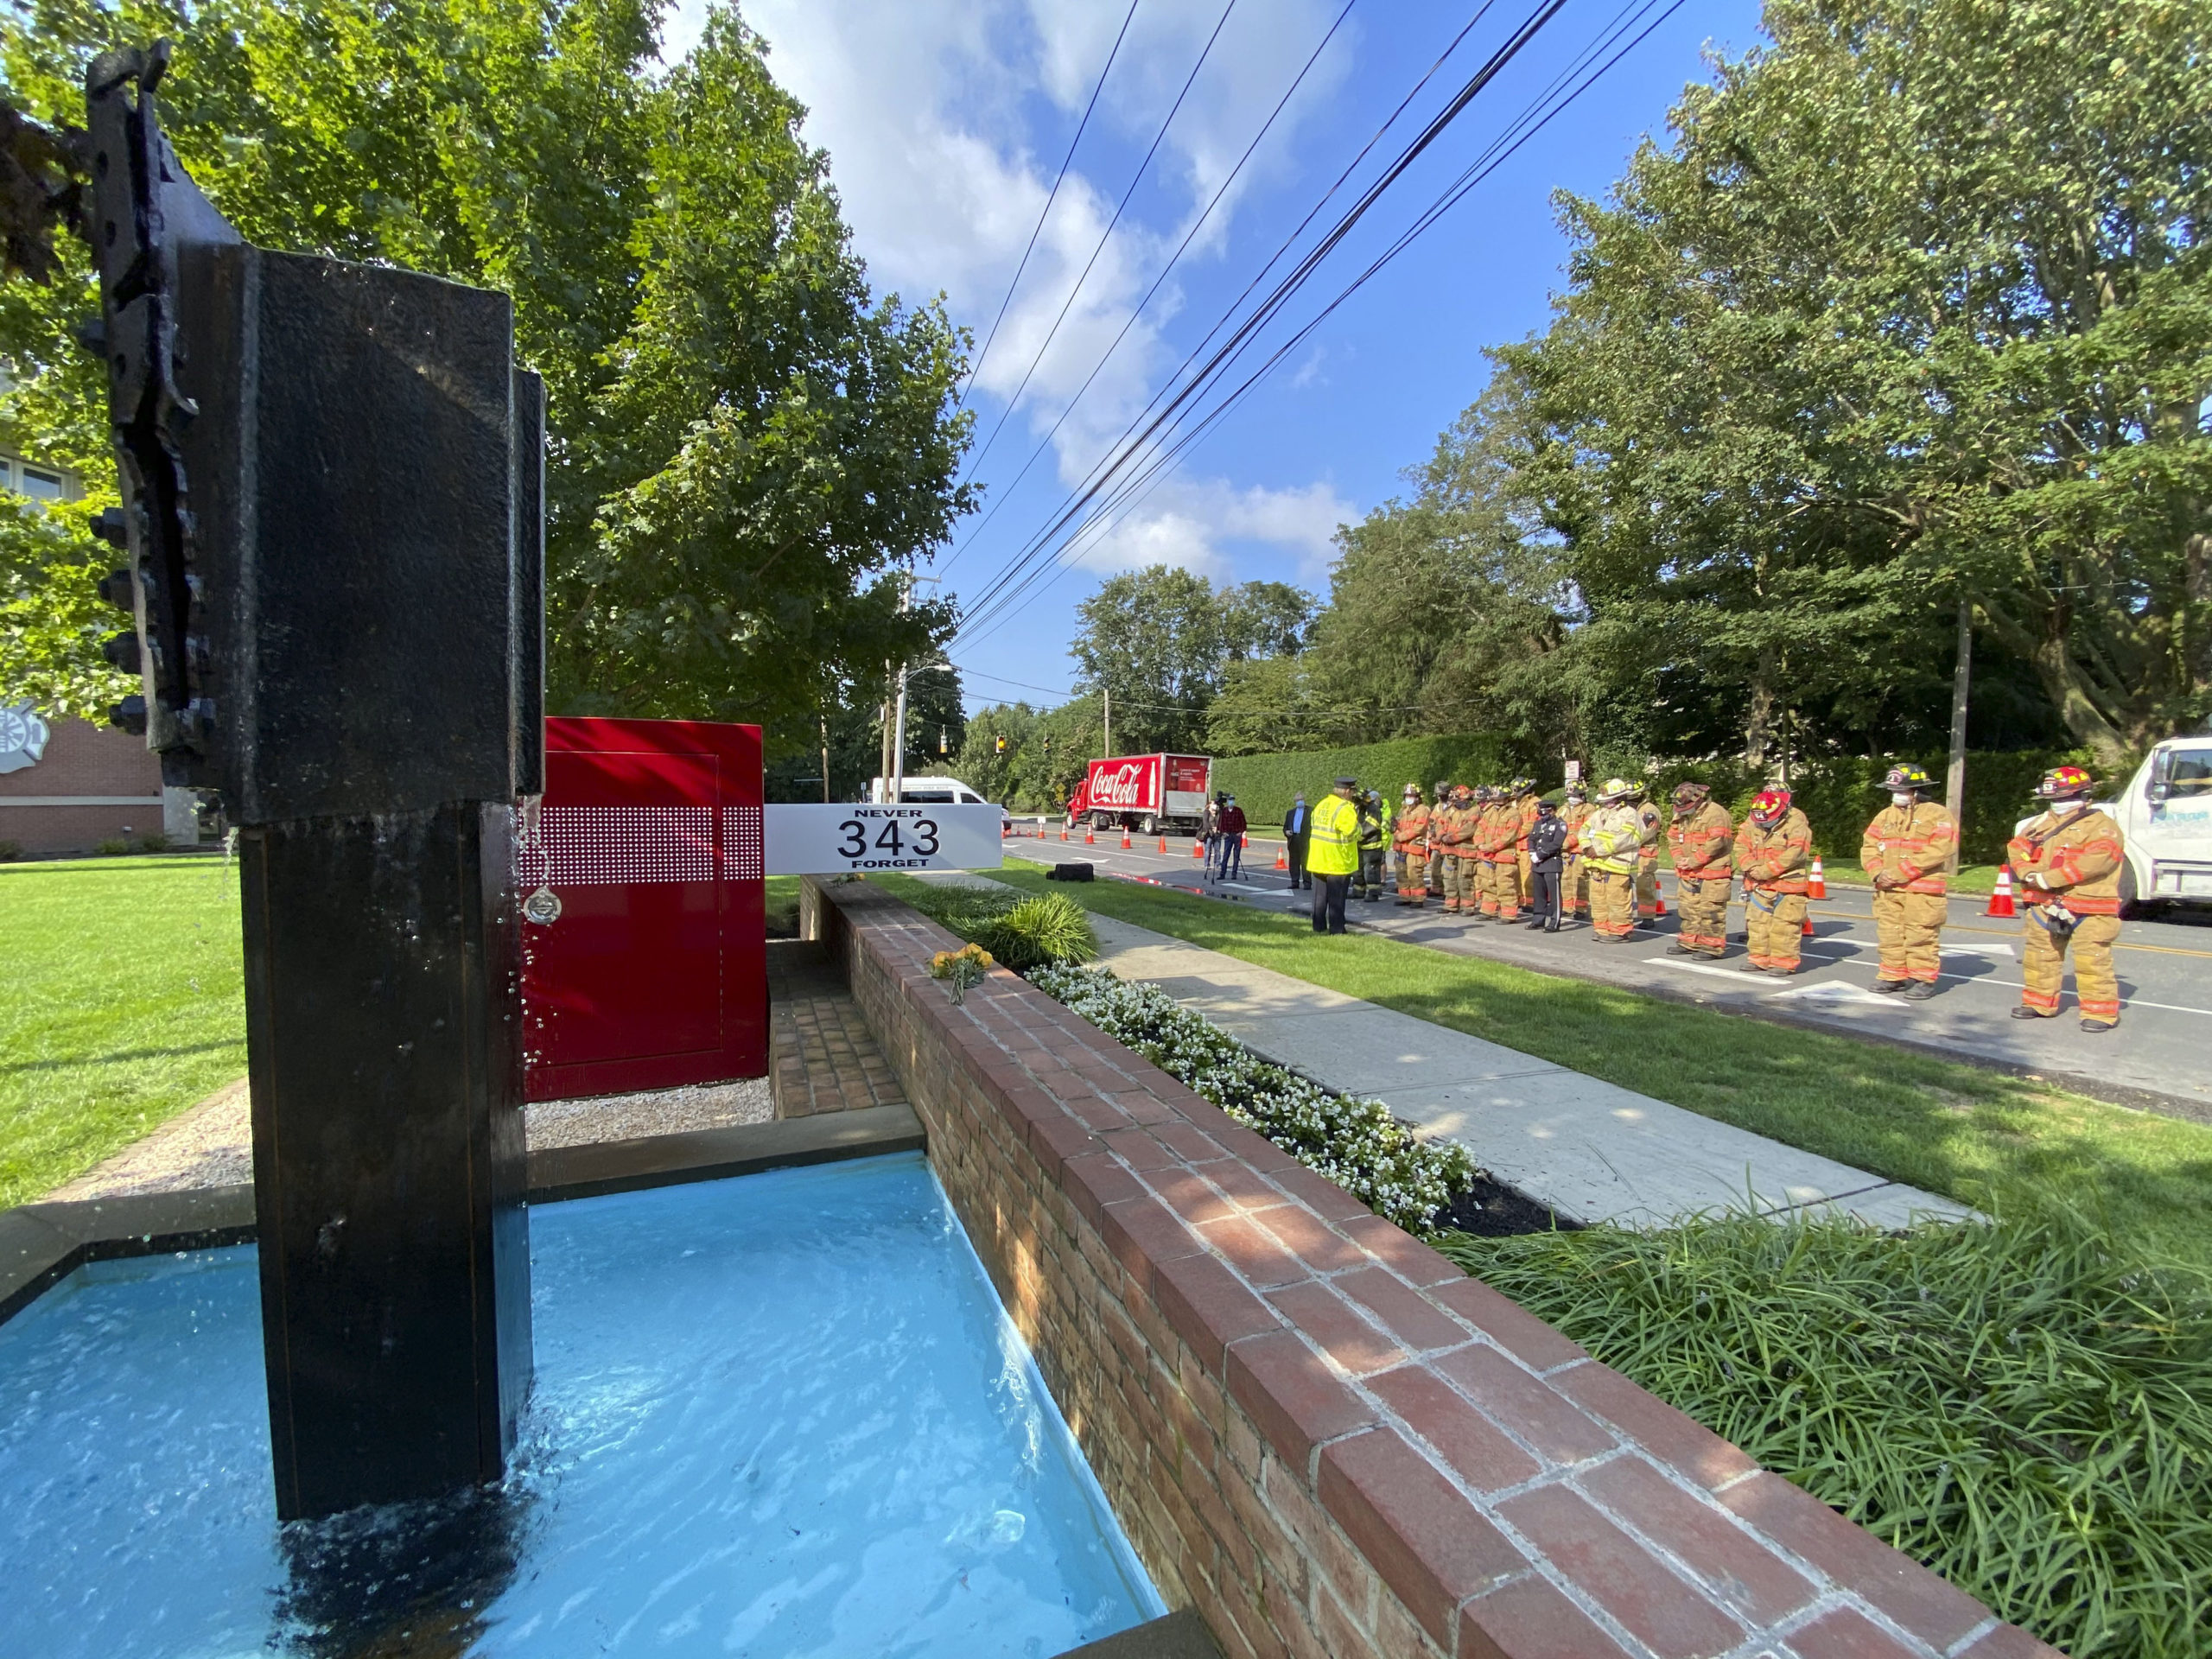 The Southampton Fire Department memorial on Friday morning.